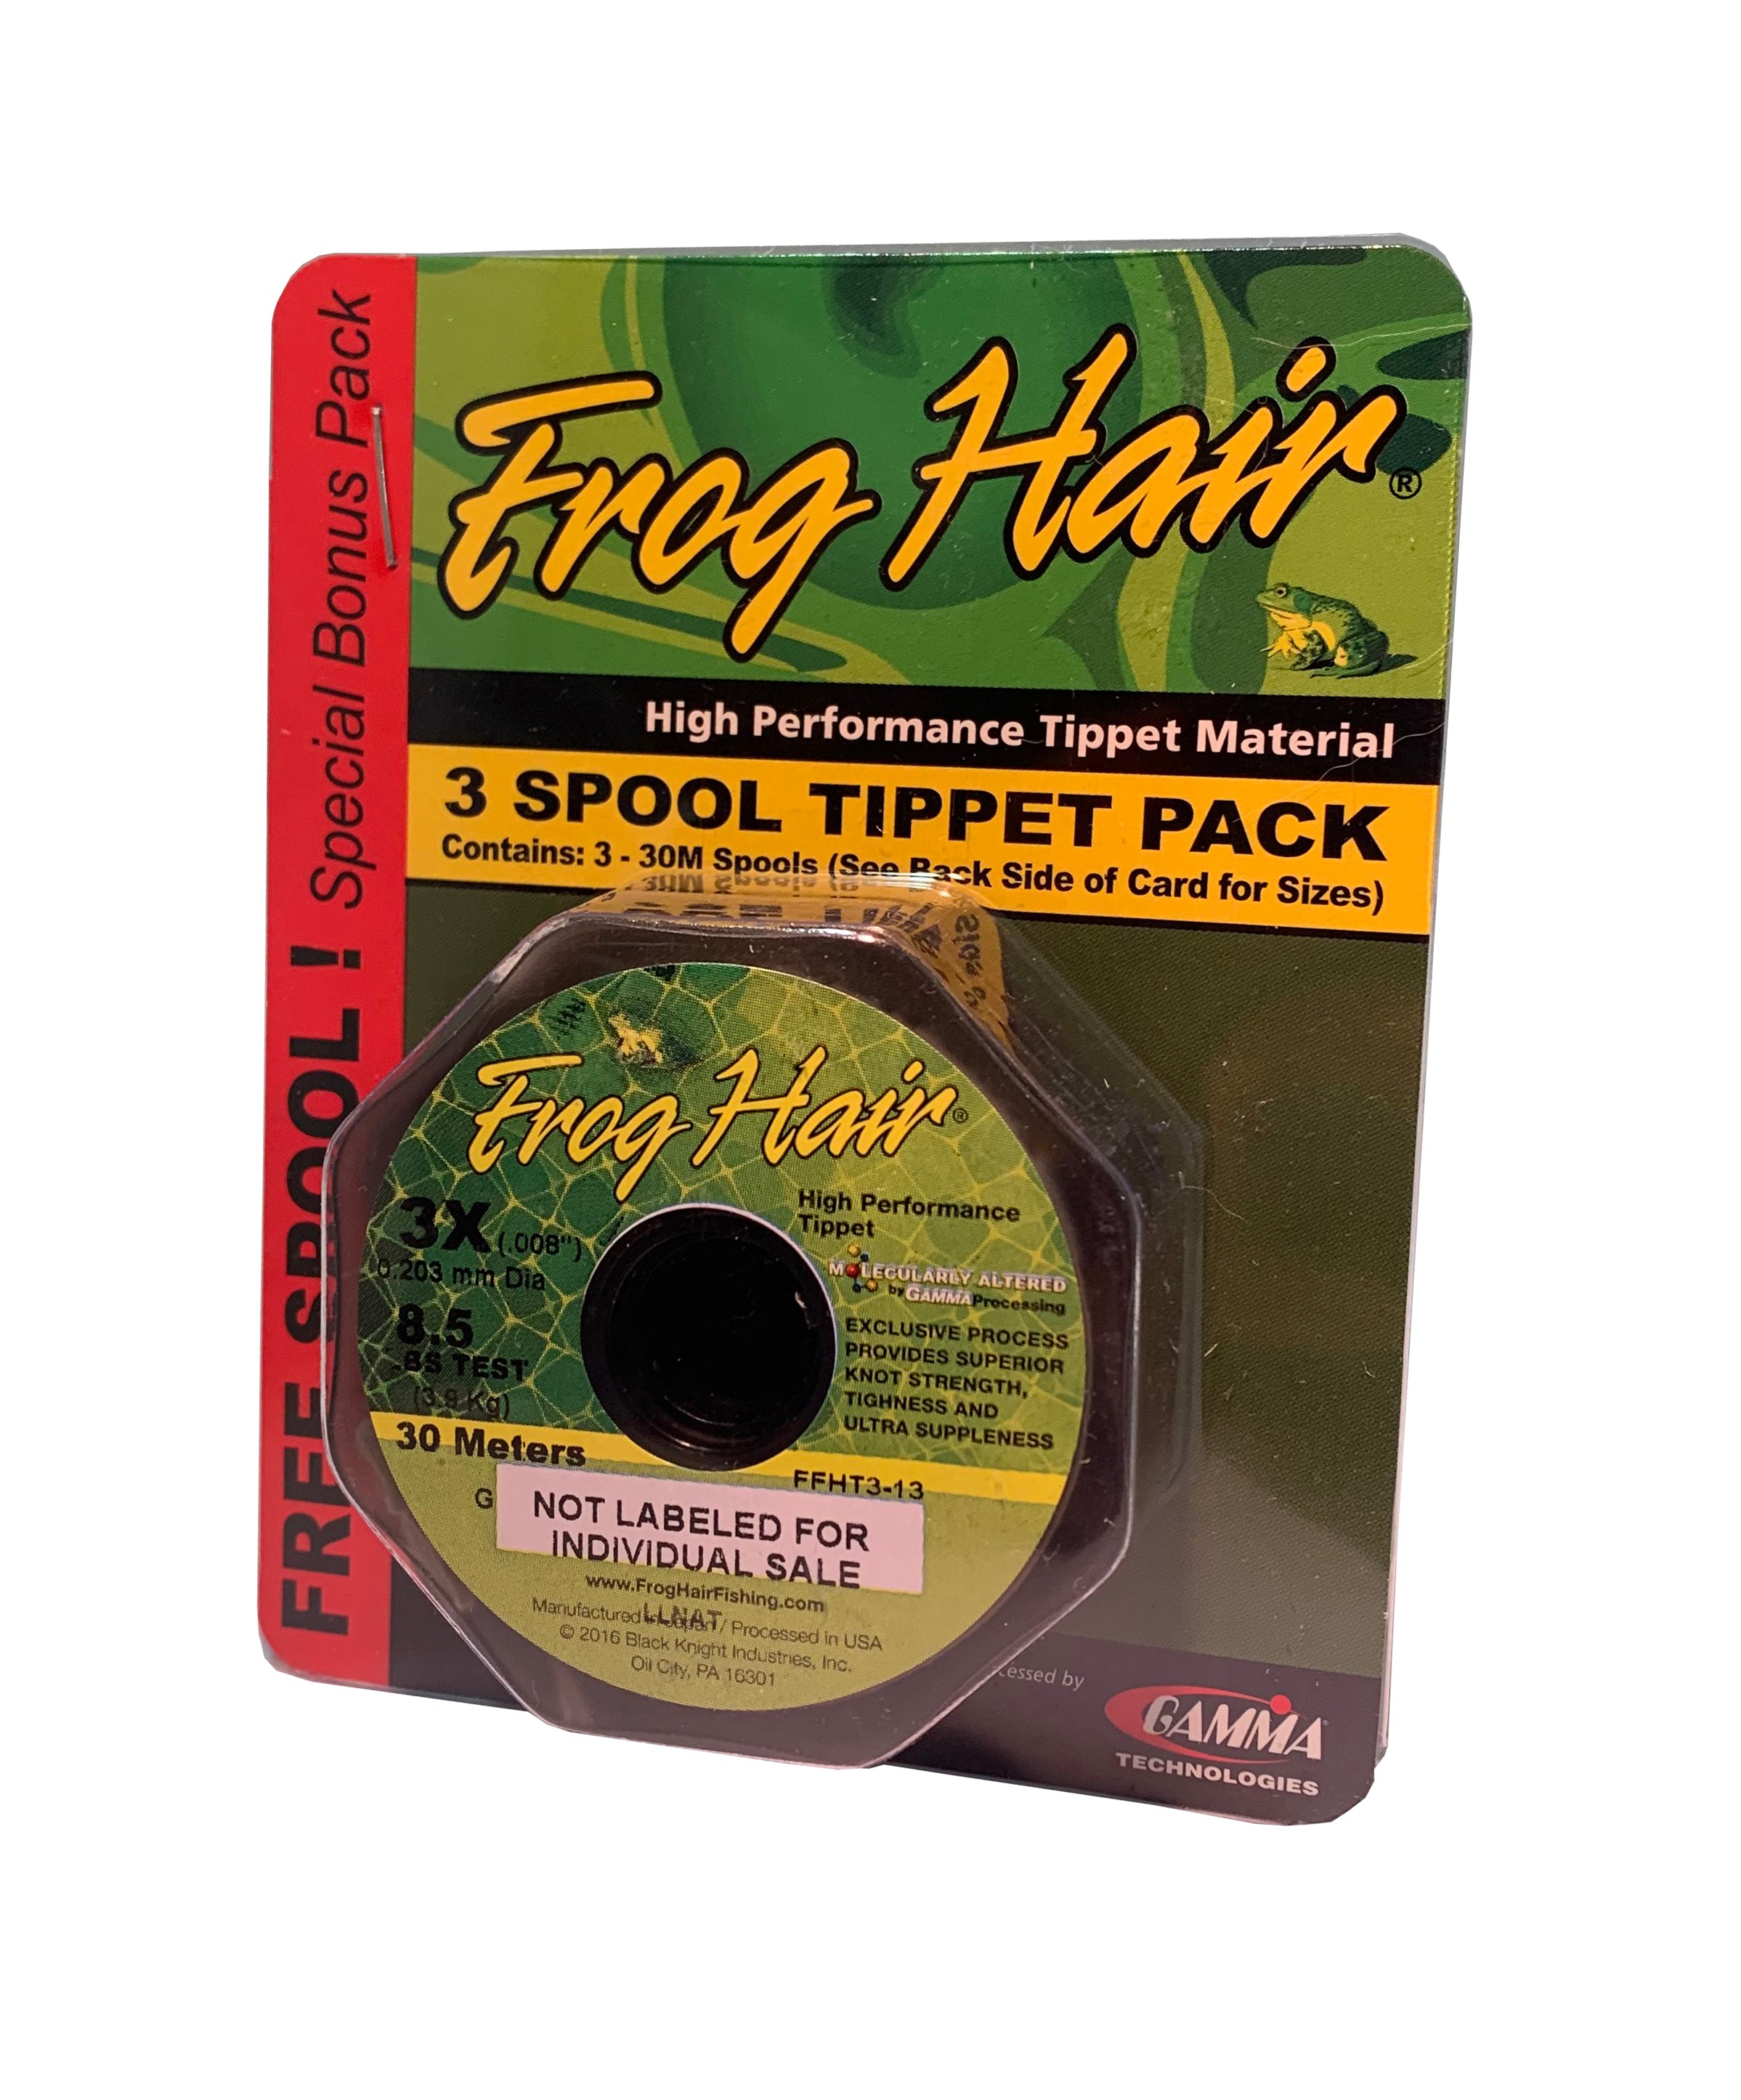 Frog Hair Fluorocarbon Tippet / Best Fly Fishing Tippet - The Fly Crate